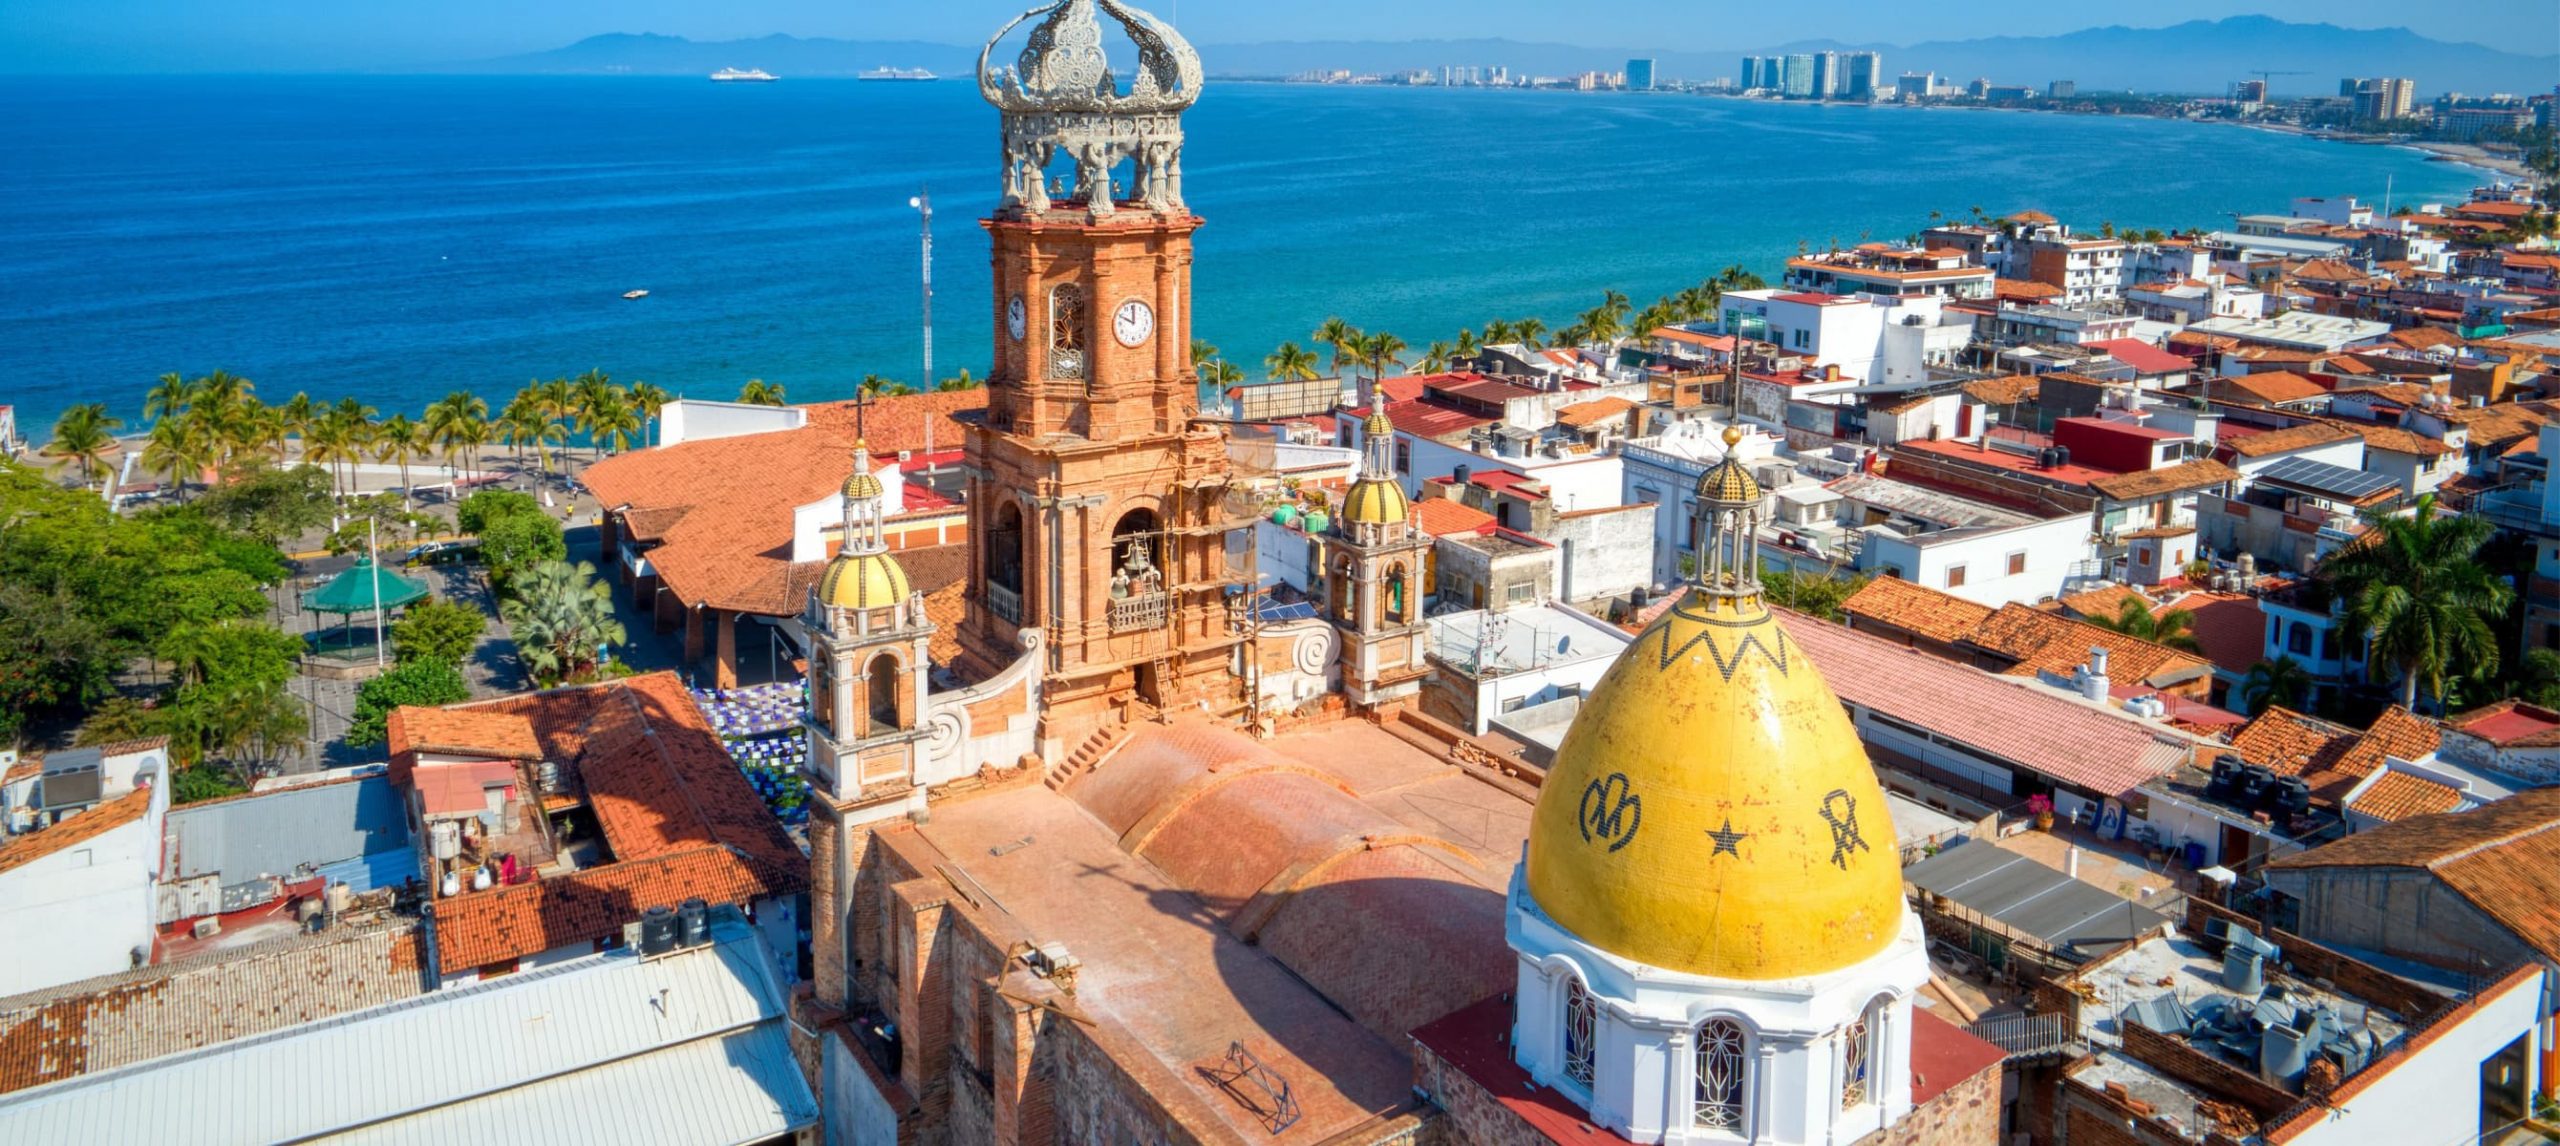 The Ultimate Guide To Puerto Vallarta, Mexico